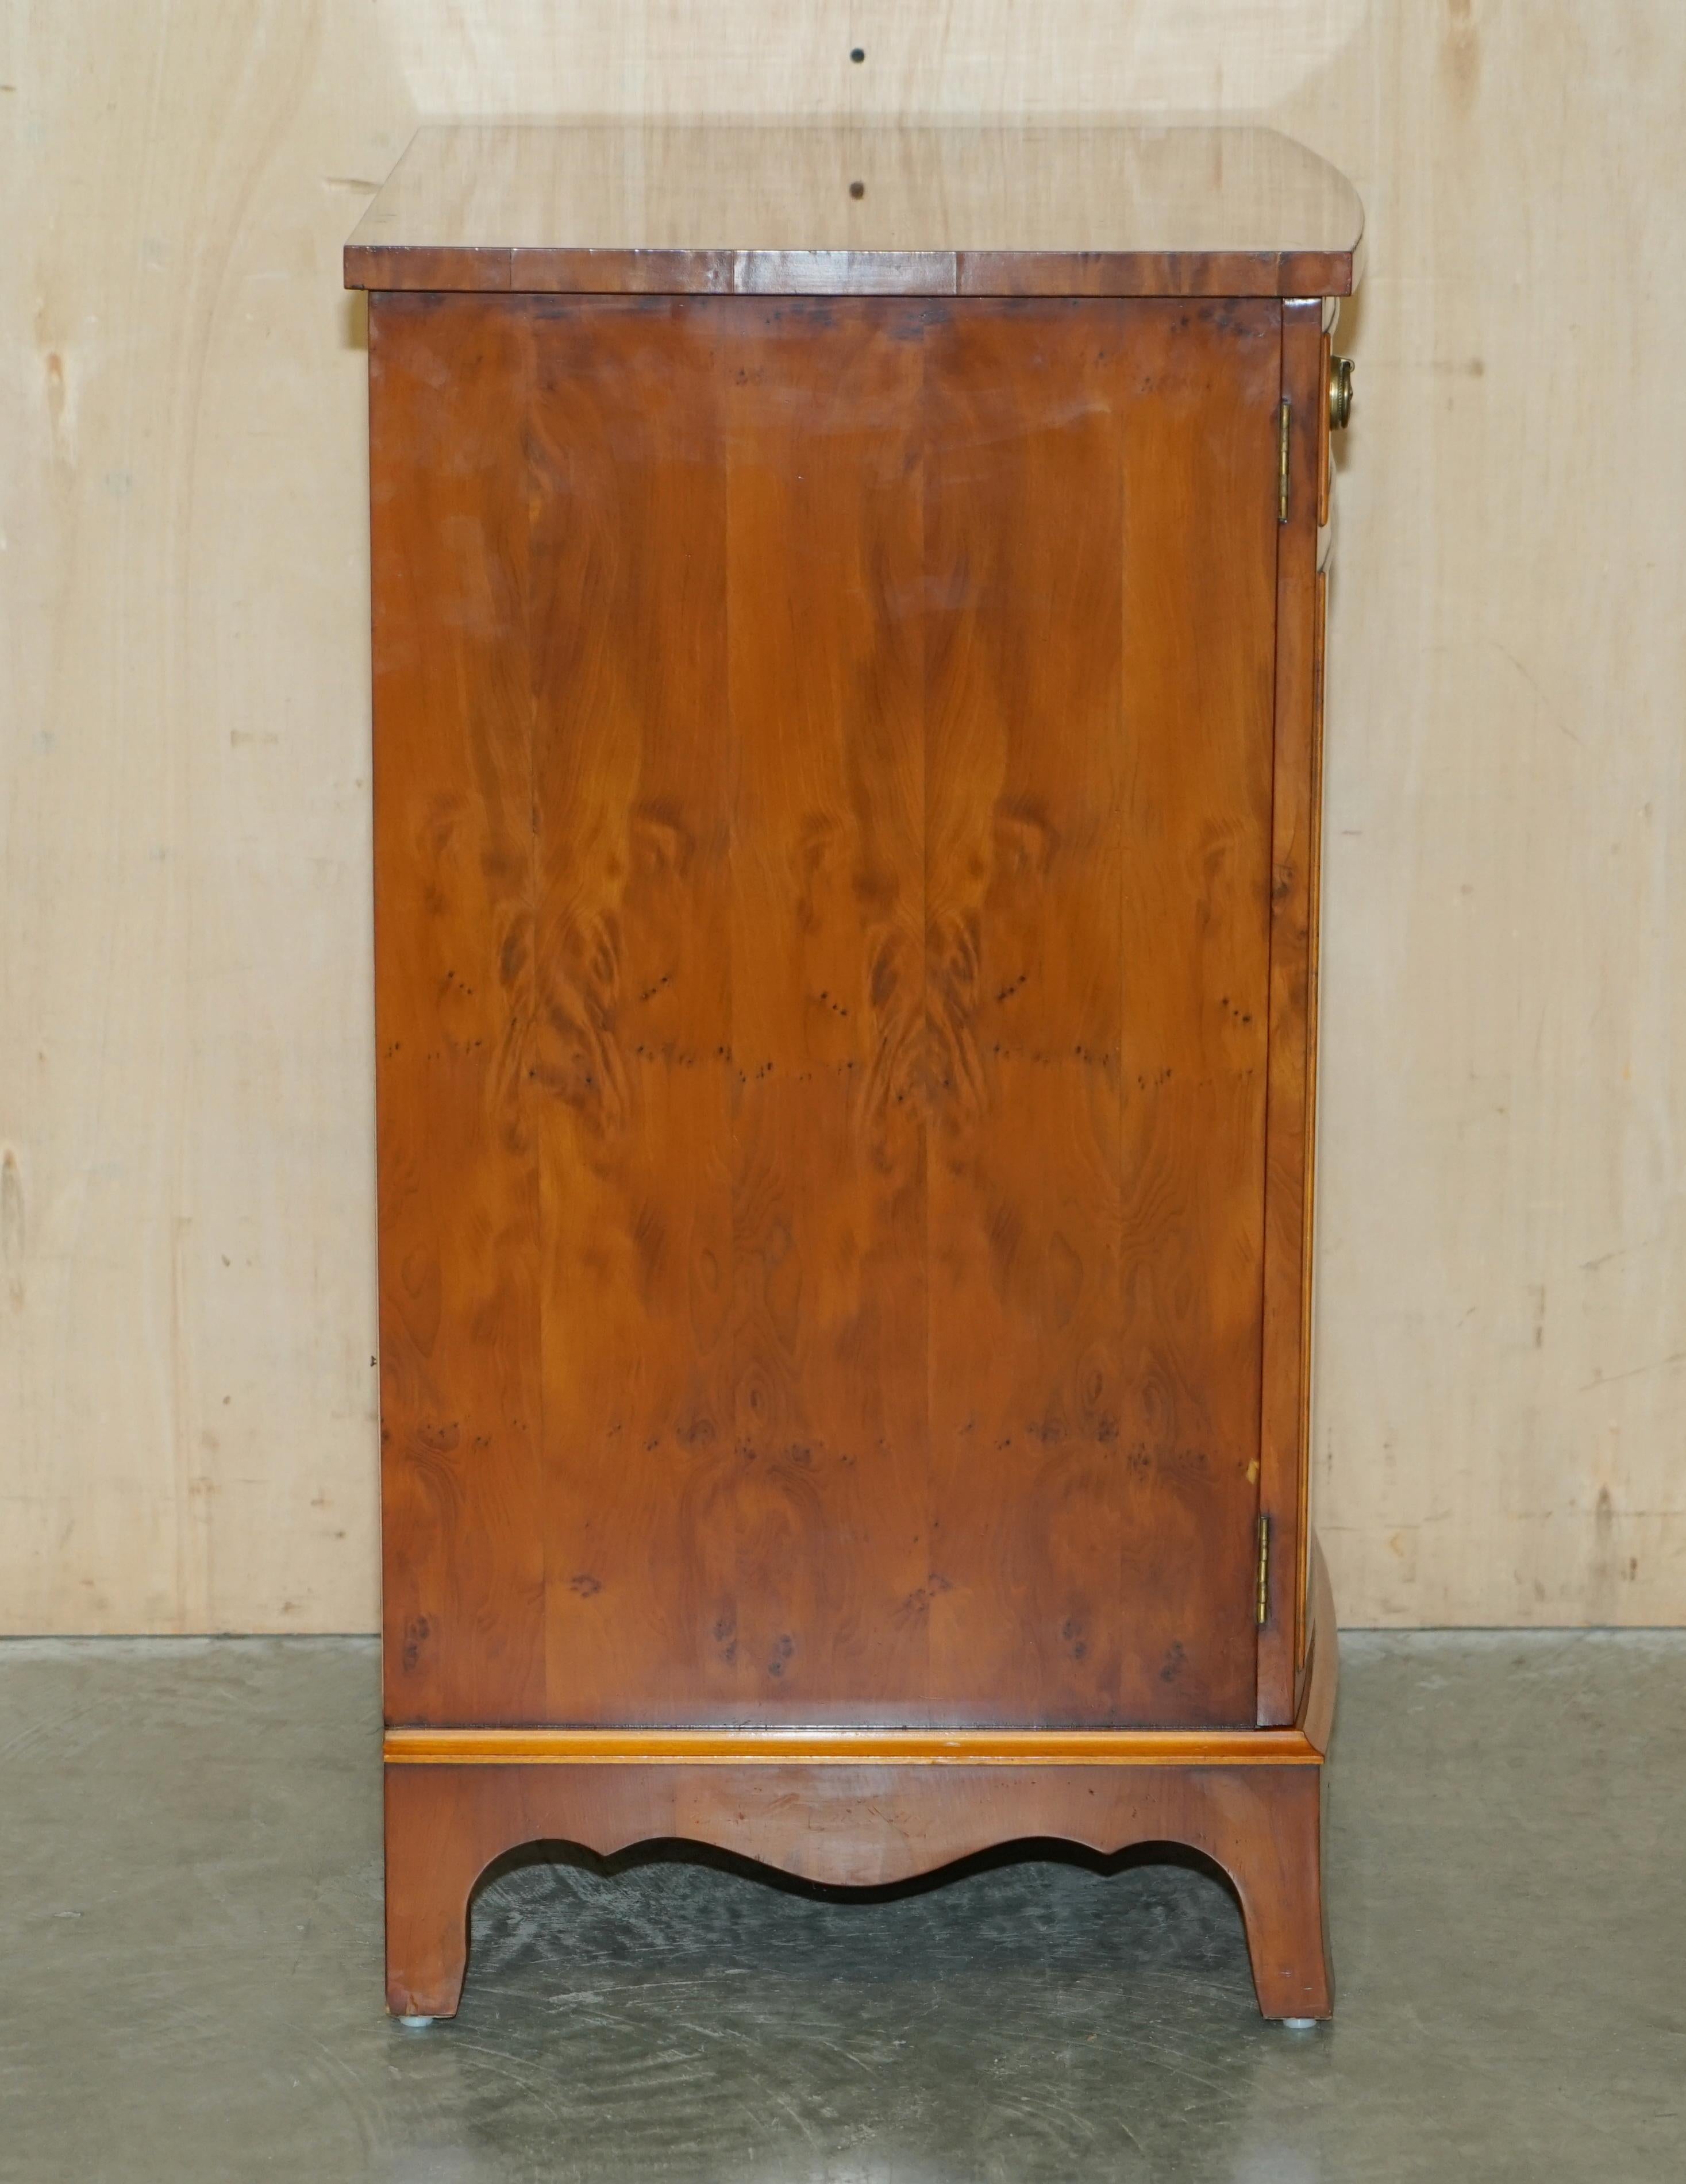 Burr & Burl Walnut Vintage Record Player Cabinet with Lift Up Top & Shelves For Sale 5